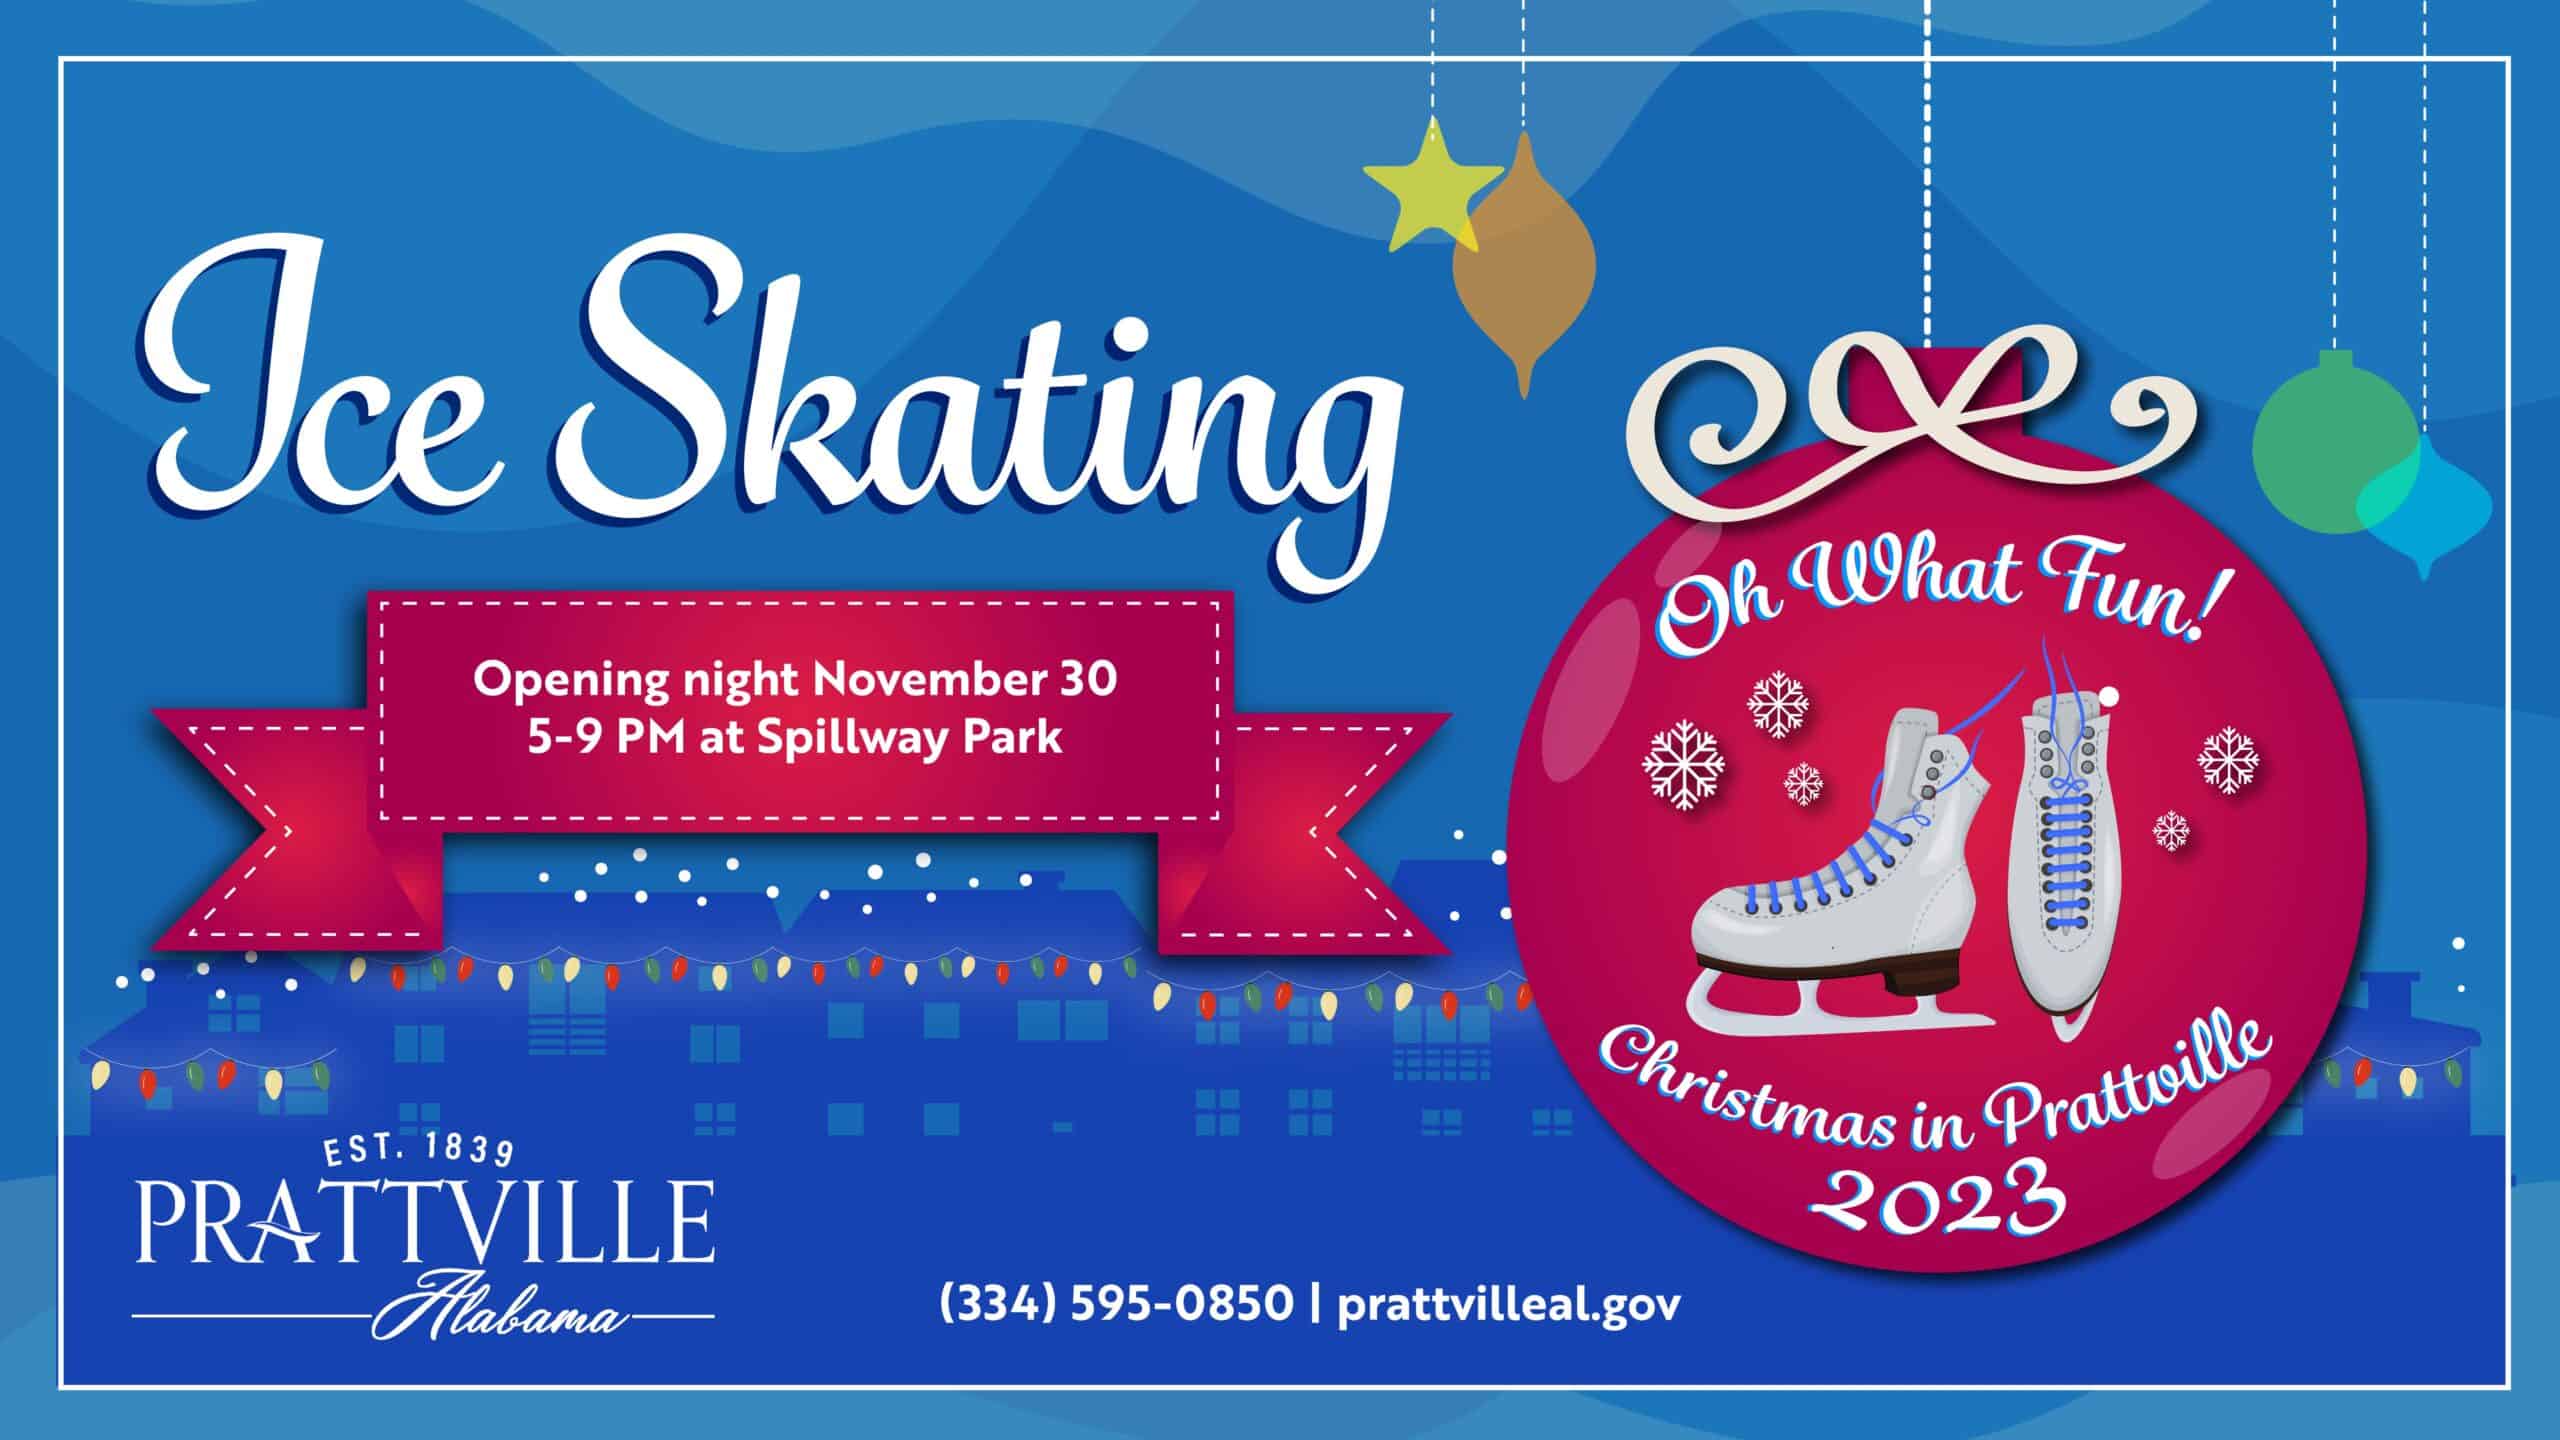 2023 Ice Skating - Christmas in Prattville